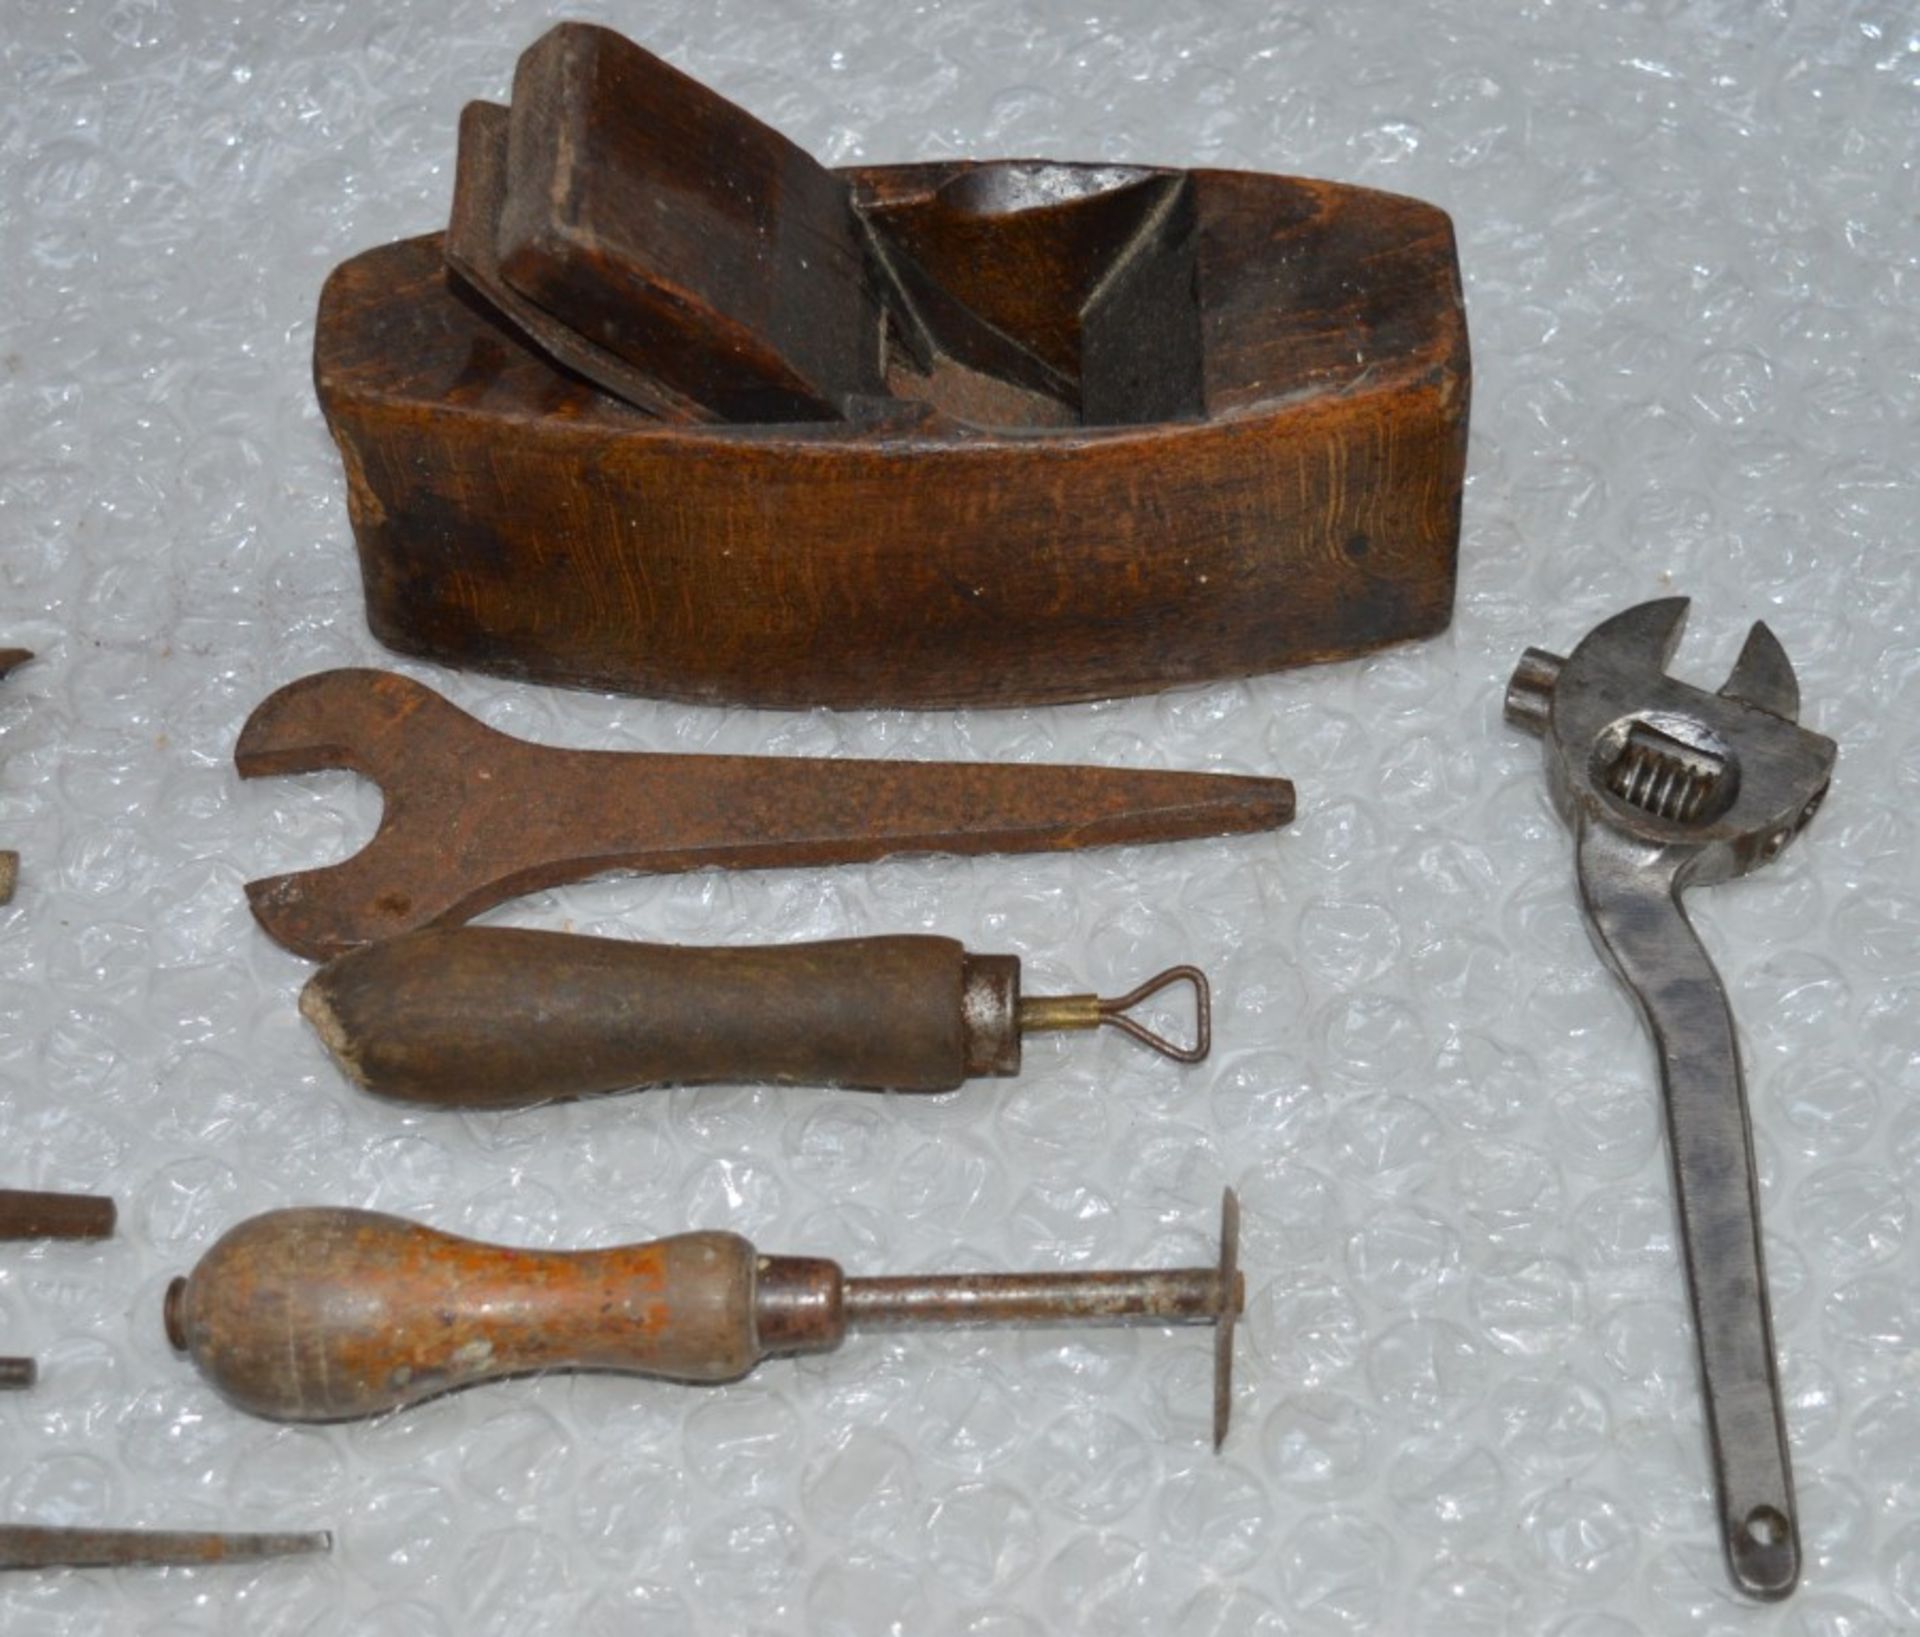 1 x Assorted Lot of Vintage Tools, Files, Rods and More - Includes More Than 30 Pieces Including - Image 29 of 31